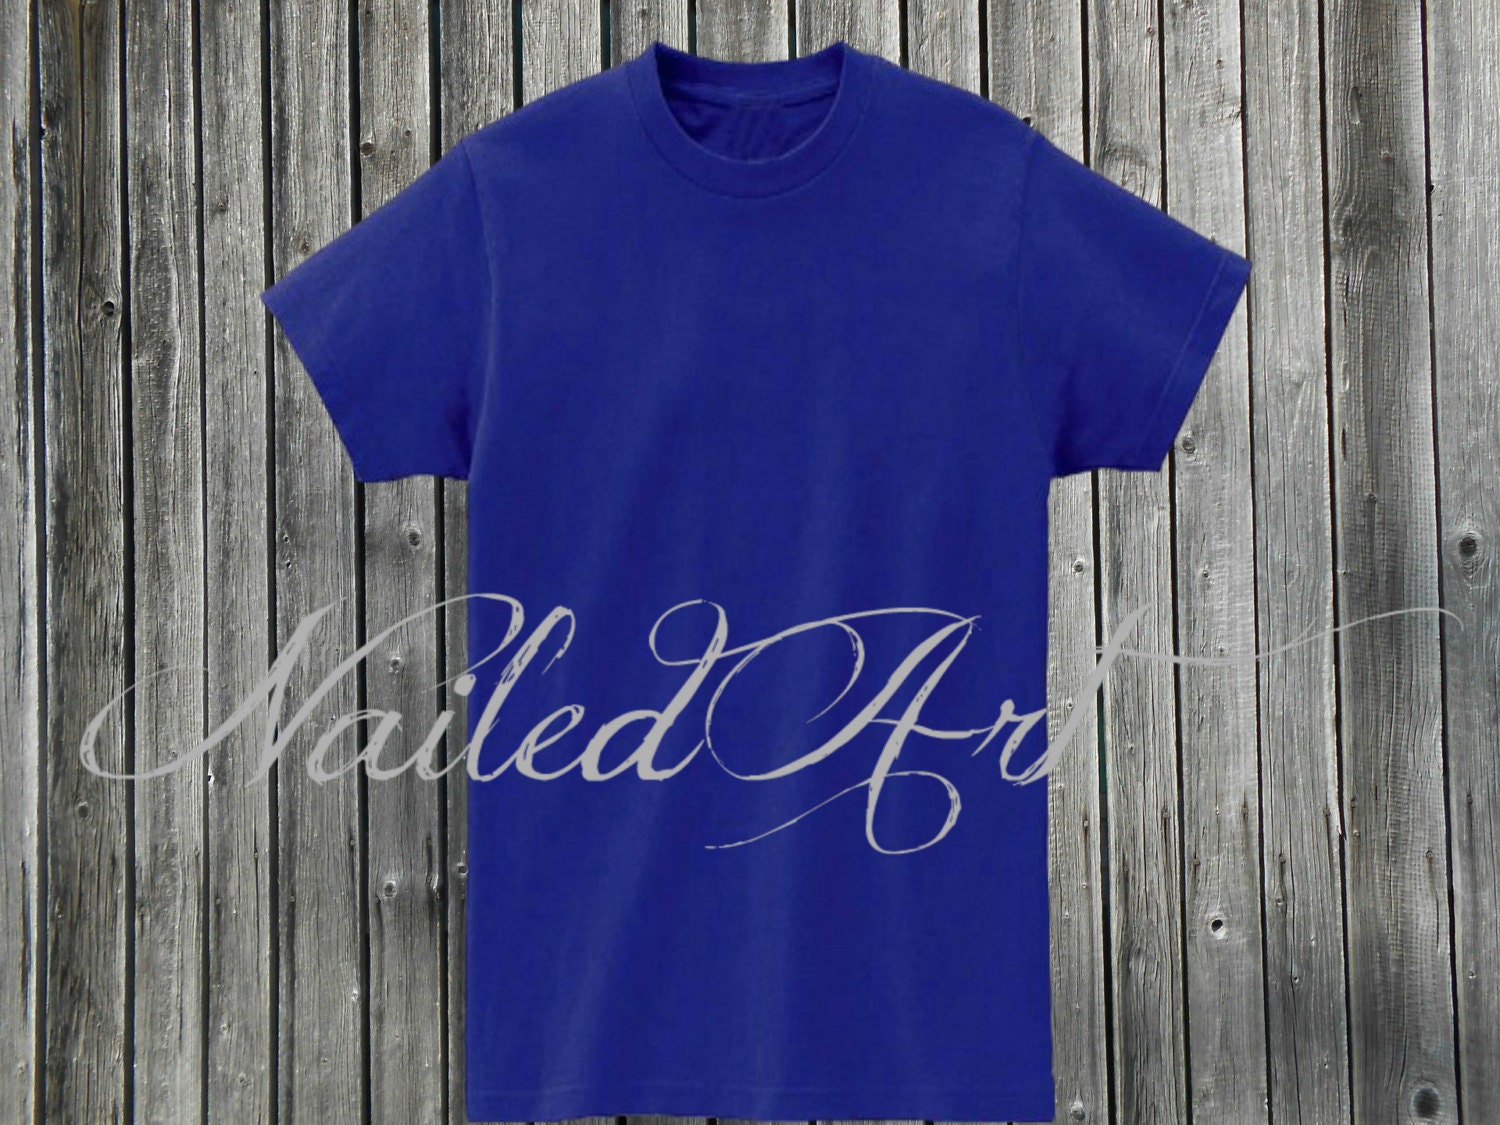 Blank Blue T-Shirt Mockup Front and Back Graphic by NailedArt1